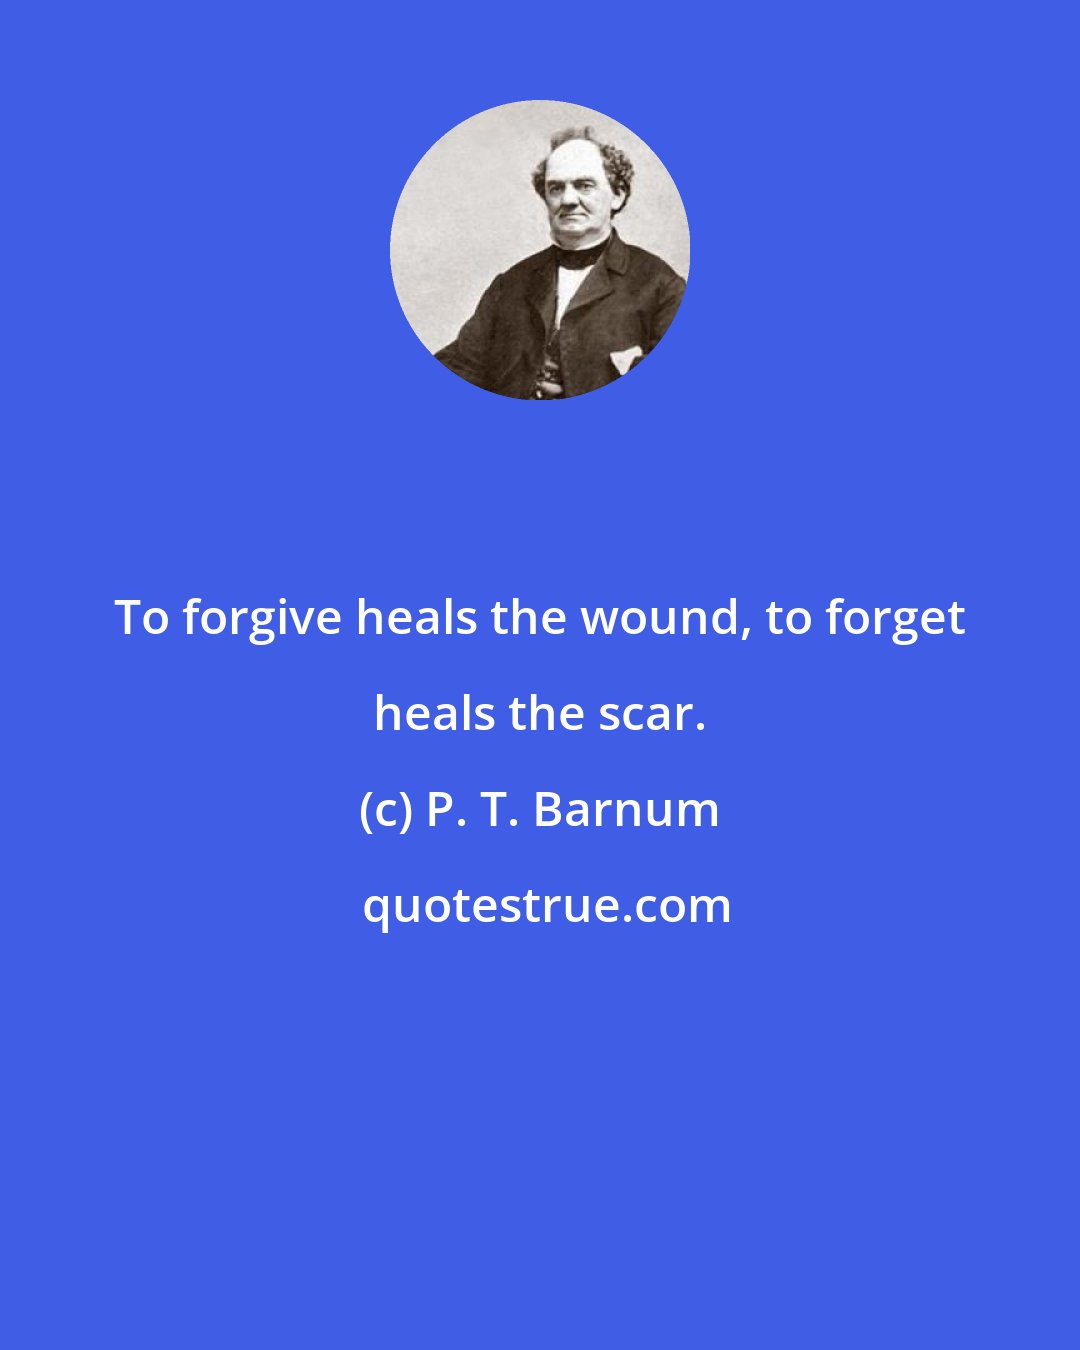 P. T. Barnum: To forgive heals the wound, to forget heals the scar.